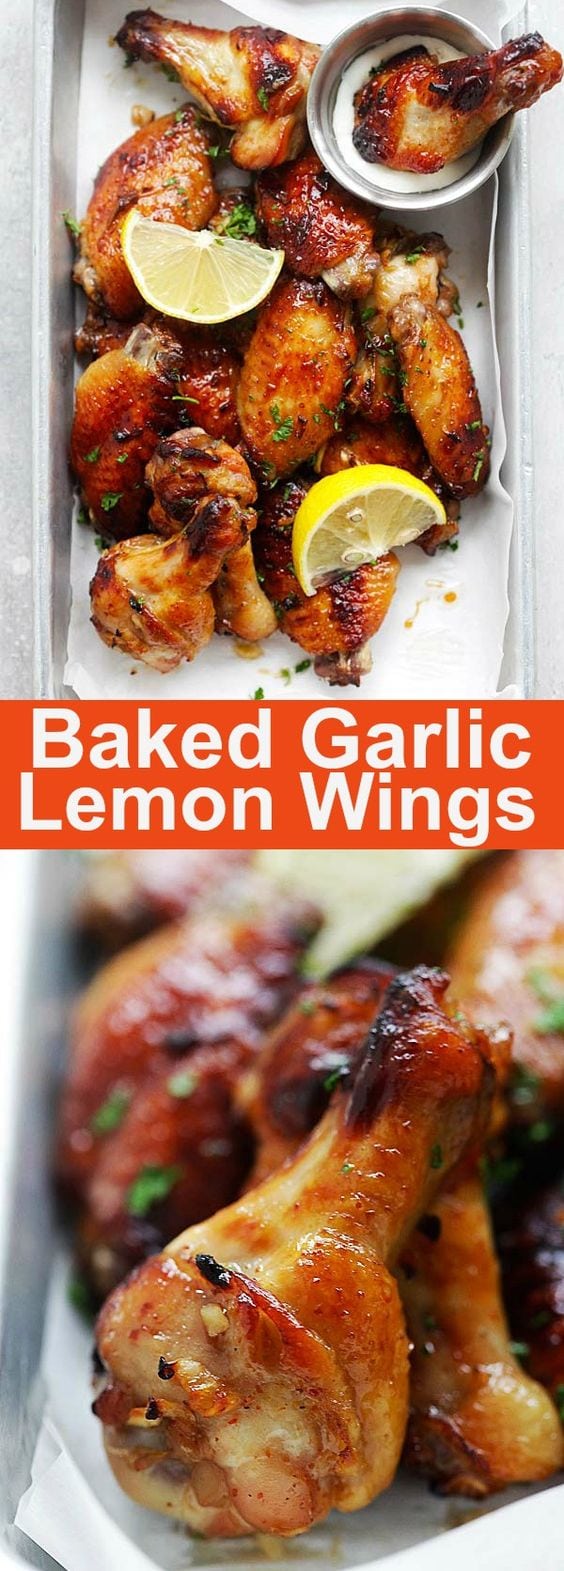 Baked Garlic Lemon Wings - easiest and best baked chicken wings that takes 10 mins active time. So delicious, garlicky and lemony | rasamalaysia.com